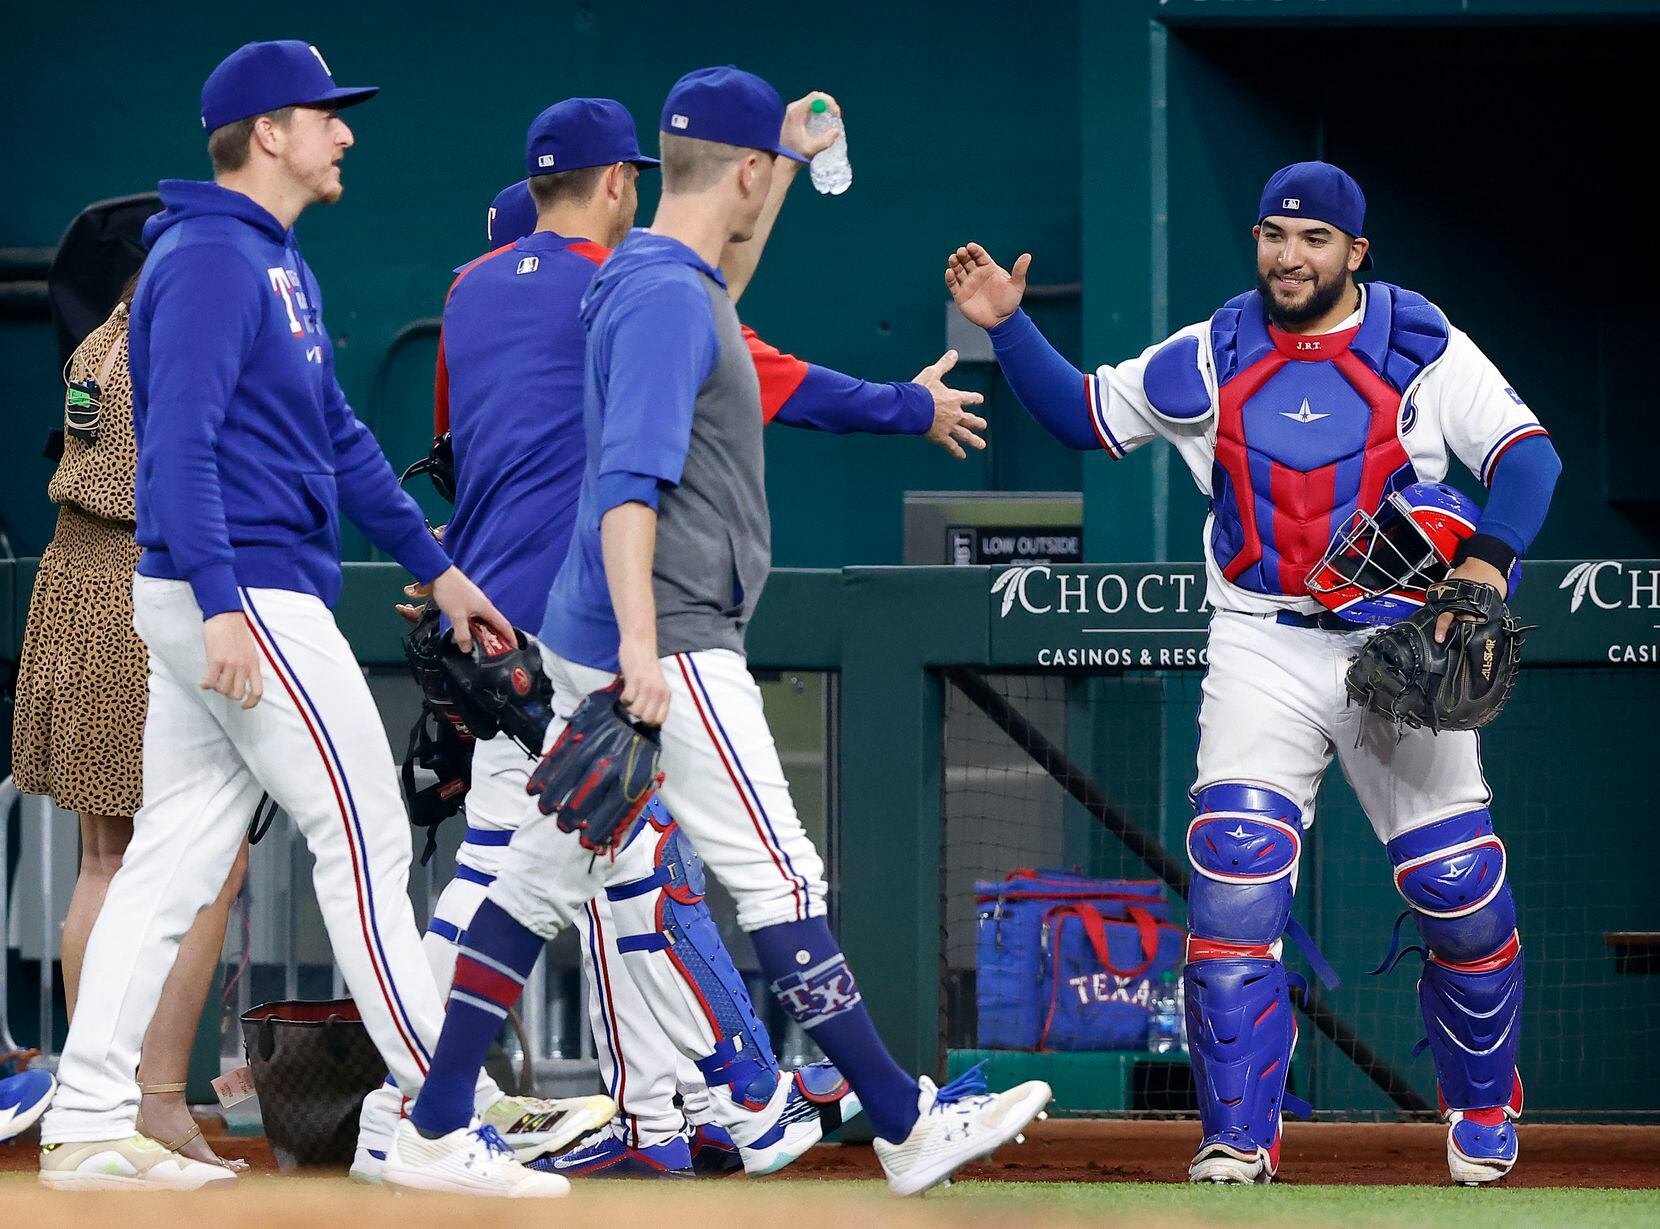 Texas Rangers catcher Jose Trevino (right) is congratulated by the bullpen pitchers after...